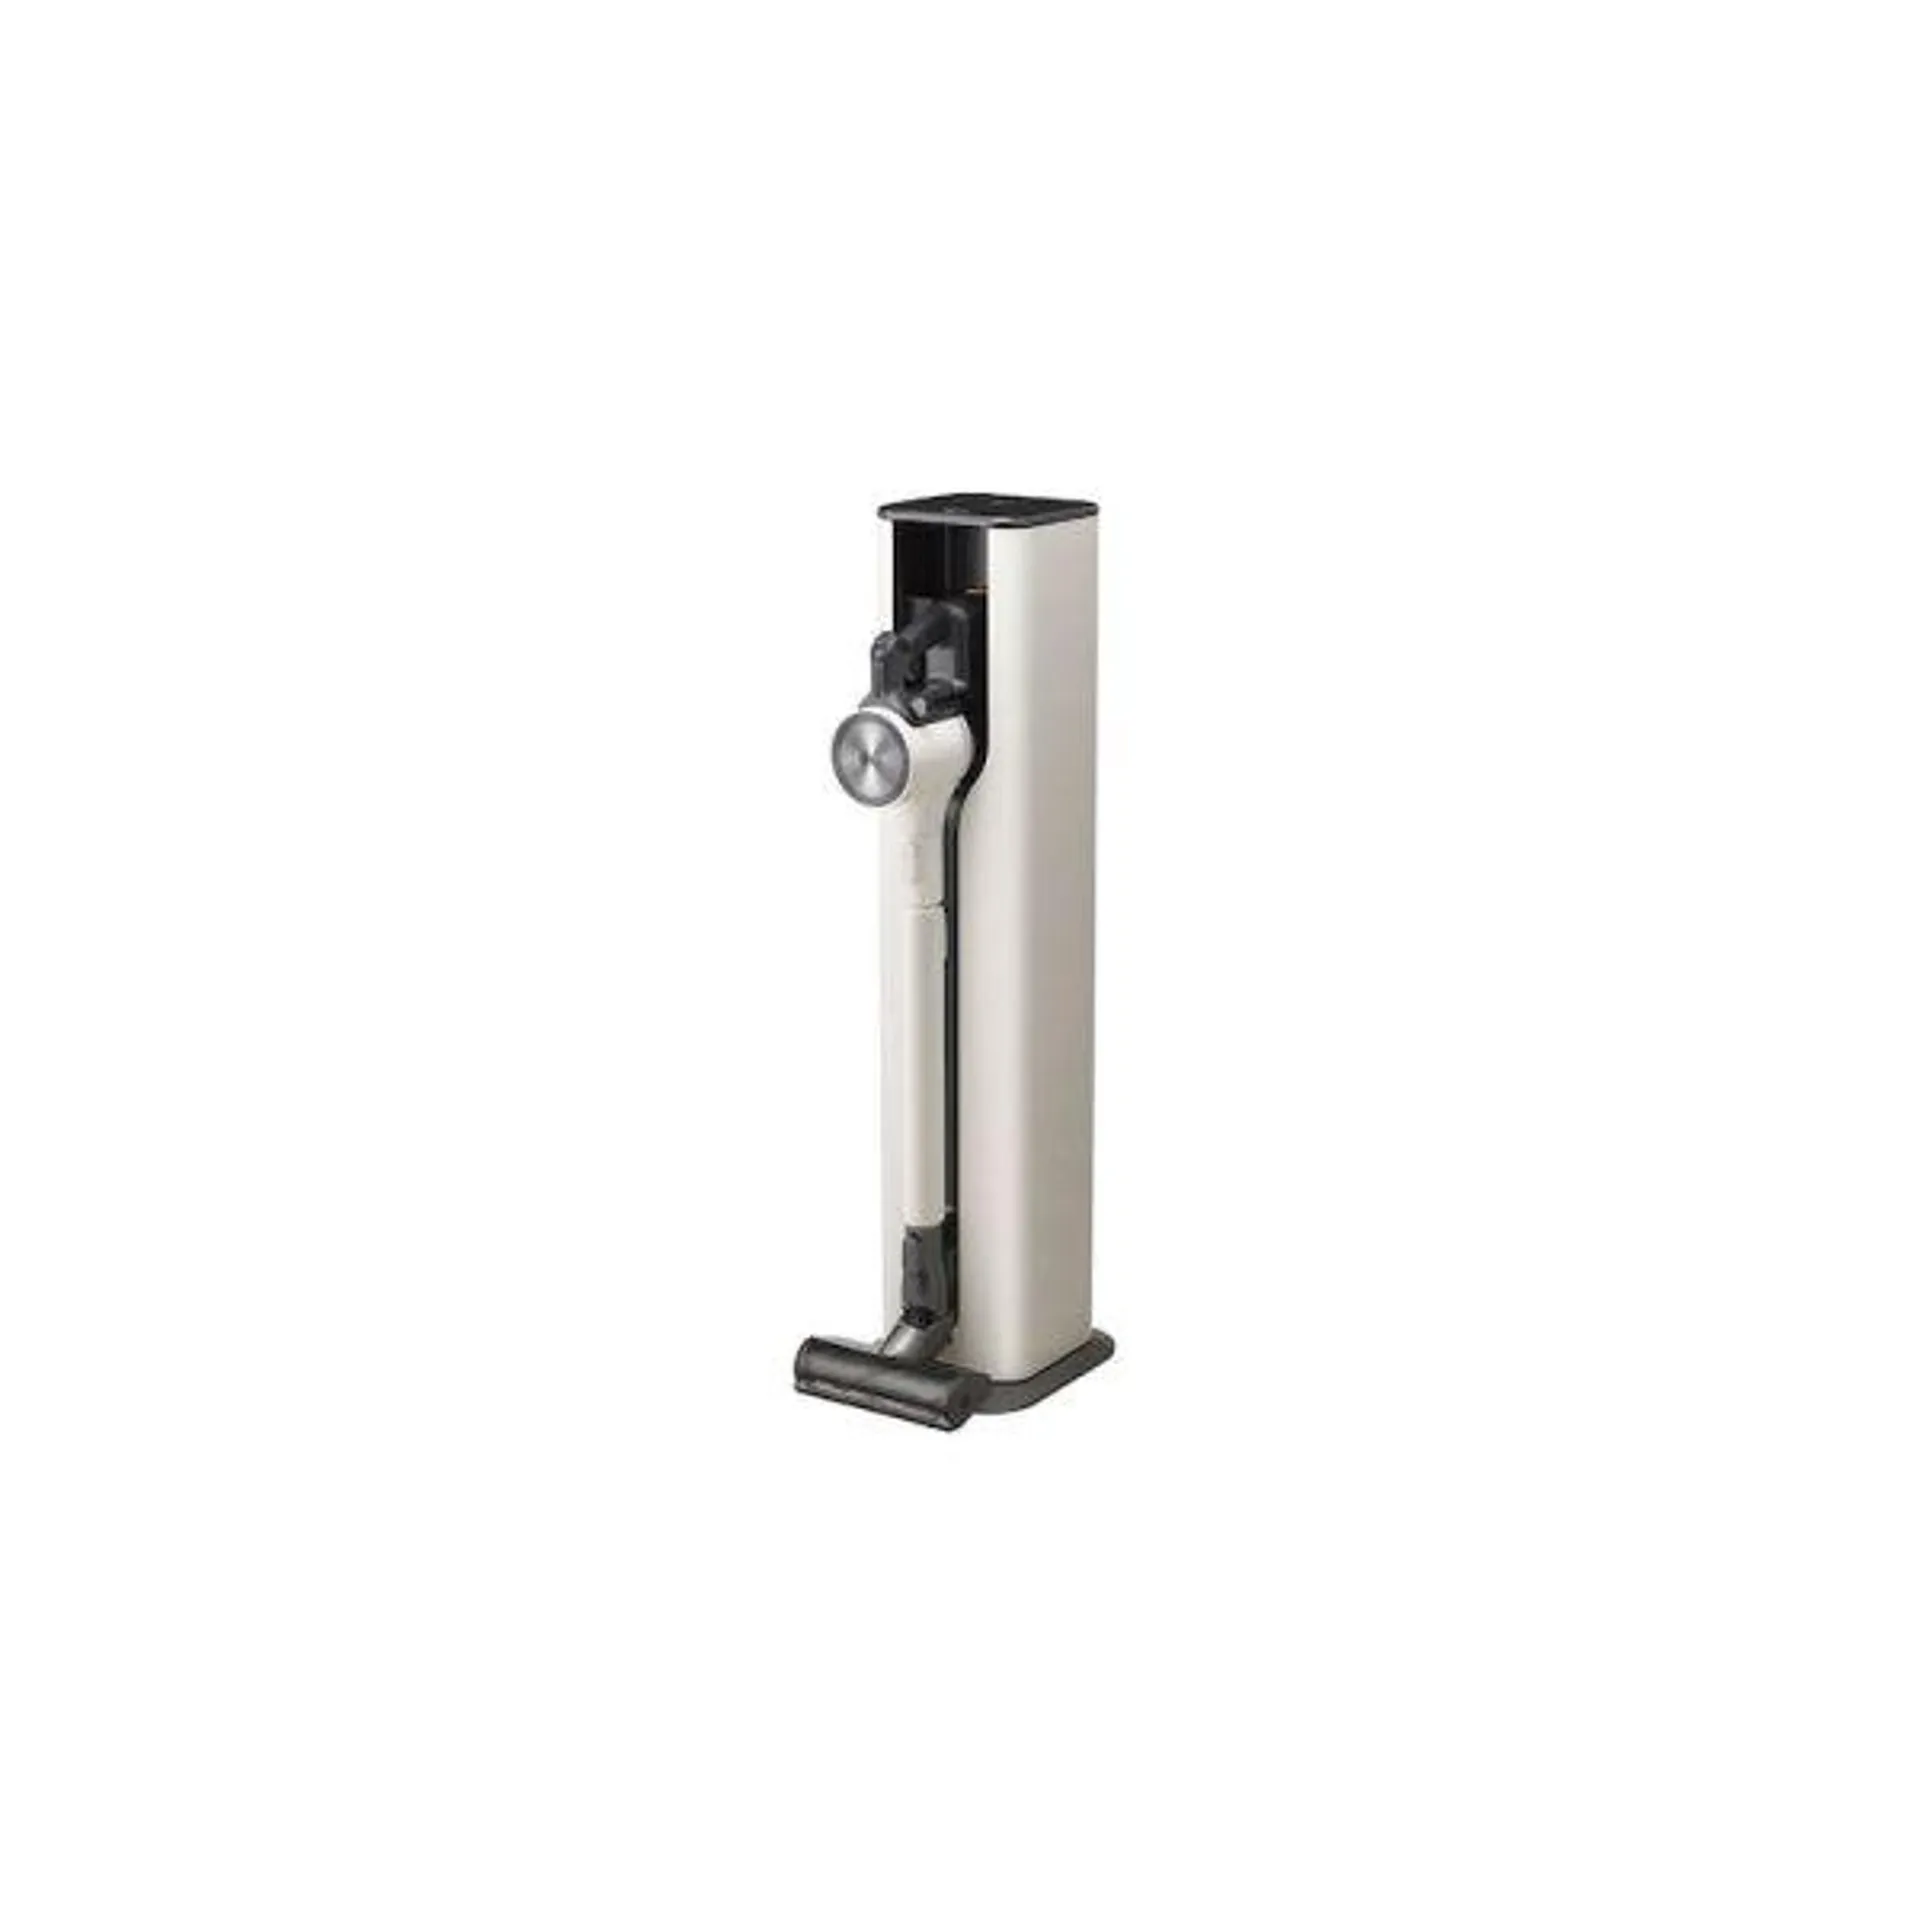 LG CordZero A9T Auto All-In-One Tower Handstick Vacuum Cleaner